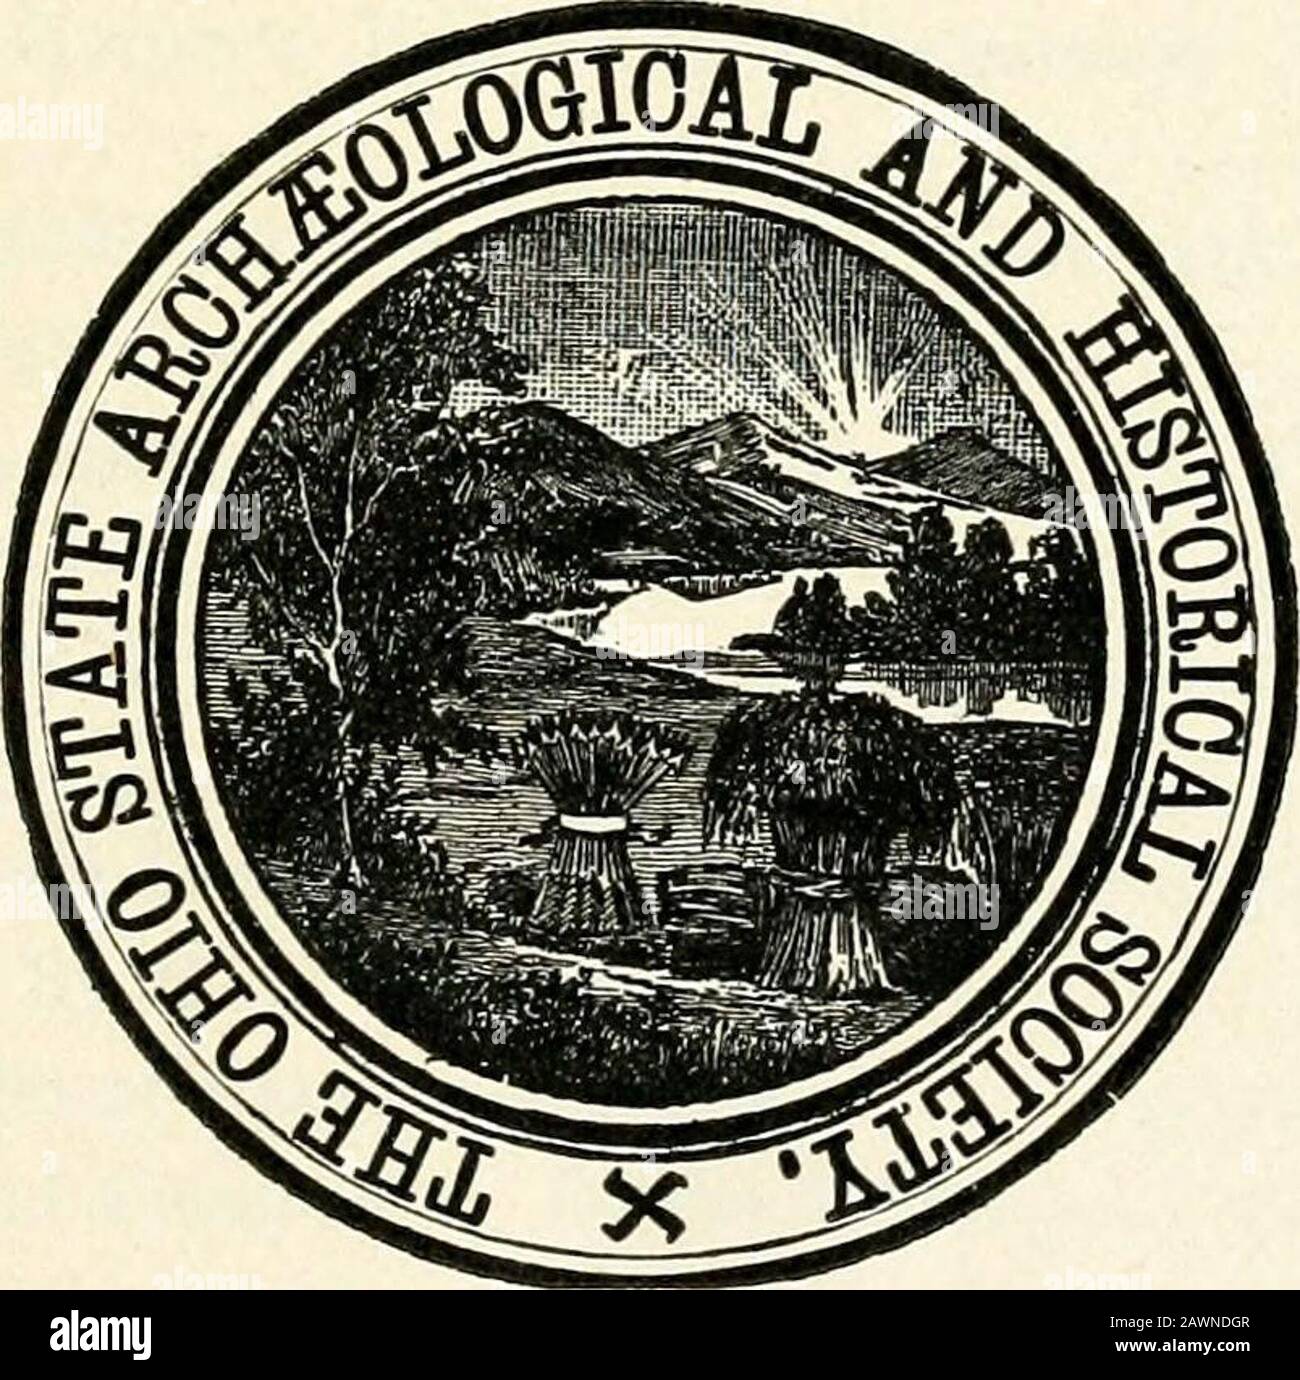 Ohio archÃ¦ological and historical quarterly . 525; electedlife member of Society, 536; reim-bursed for money expended for proof-reading, 539. Wilson, Austin J., 503. Wood, E. F., Treasurer of Society, 503;annual report of, 505-517; elected trus-tee, 534; 535; 536; resolution amend-ing constitution presented by, 537;motion by authorizing message toPresident Harding expressing sym-pathy with coming conference on lim-itation of armaments, 537; remarksand motion relative to a partial re-organization of the Society, 538; ap-pointed on reorganization committee,538; elected treasurer of Society, 539 Stock Photo